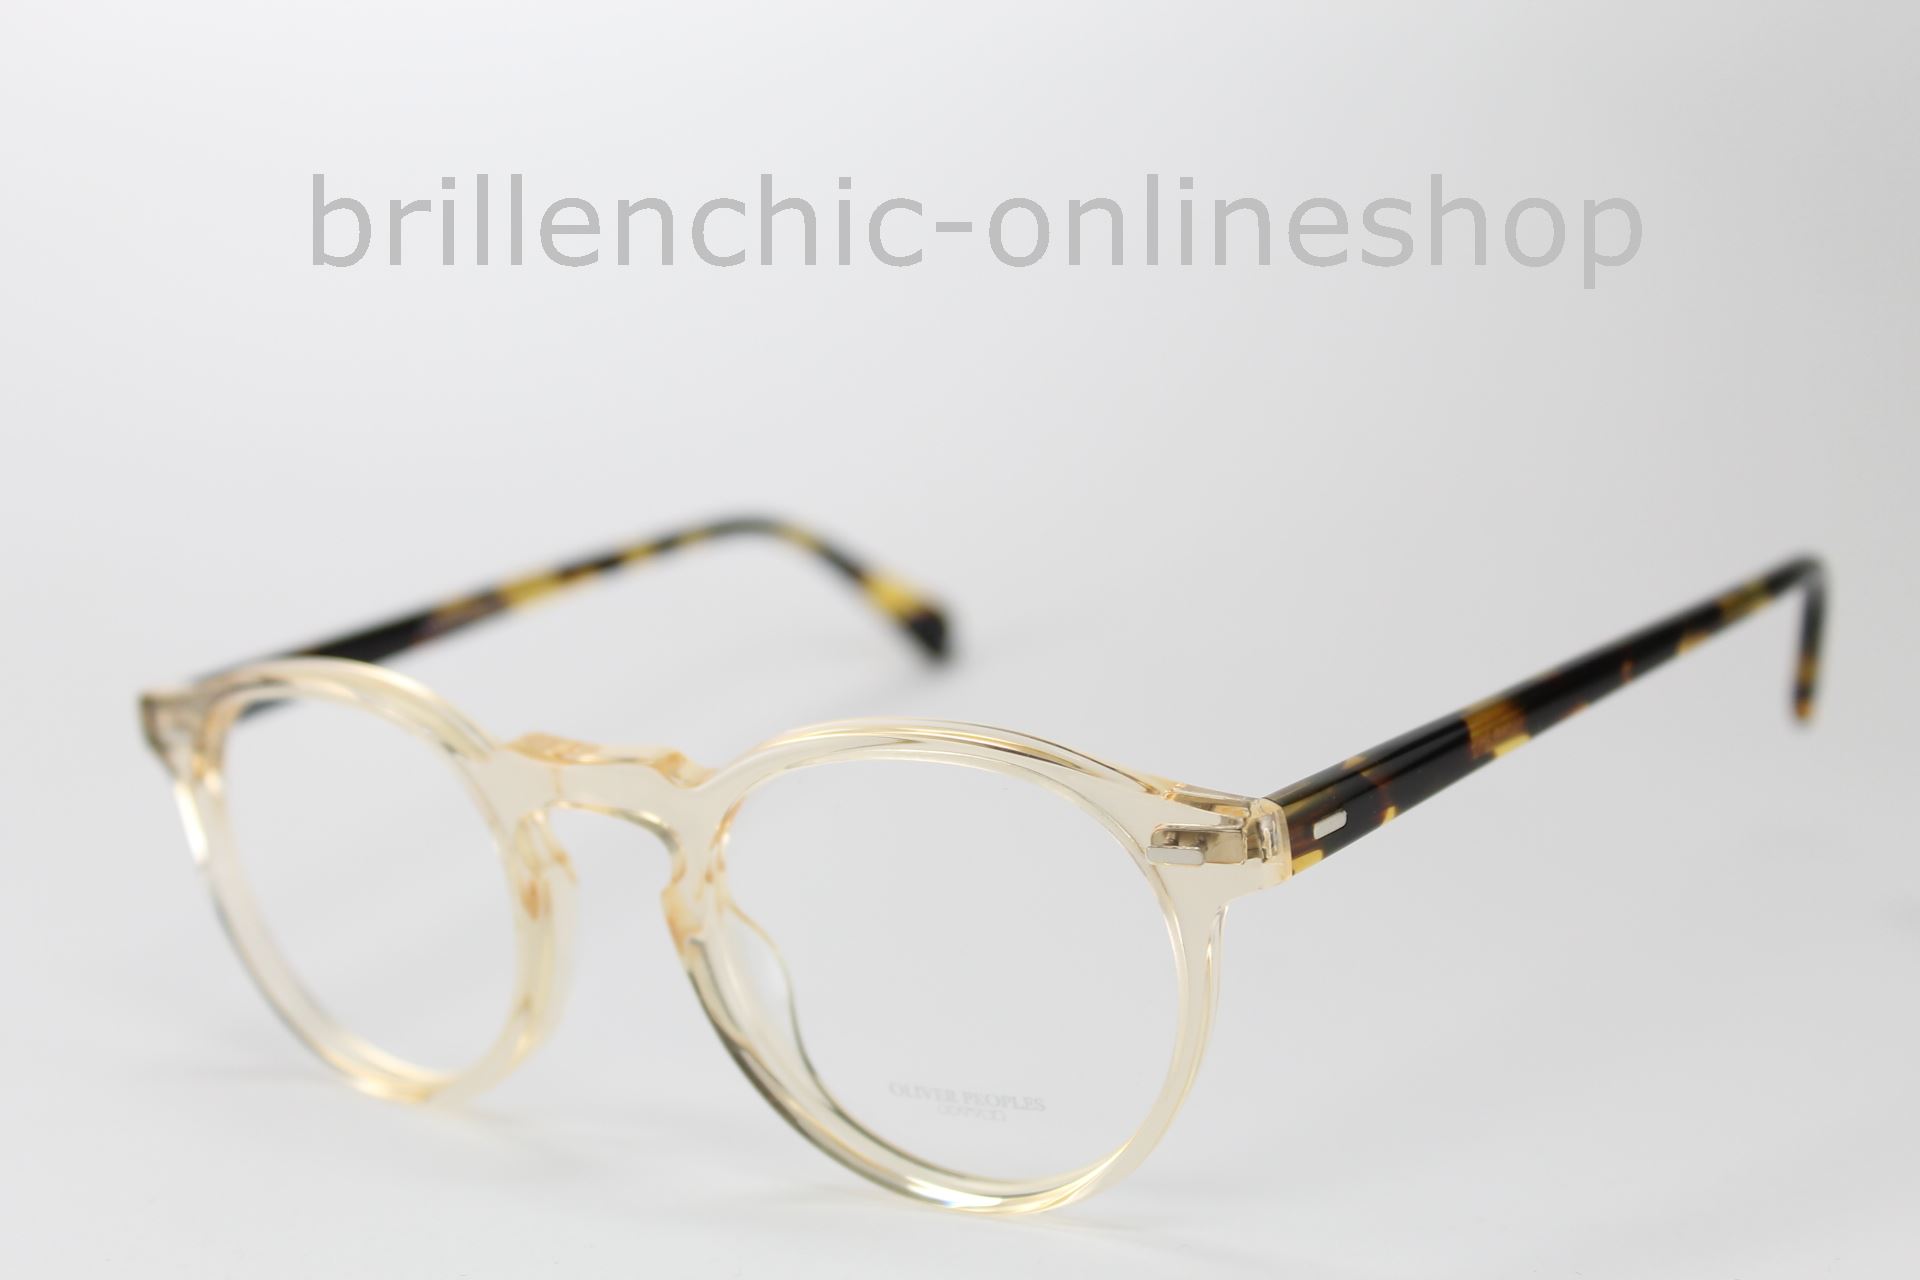 Brillenchic-onlineshop in Berlin - OLIVER PEOPLES GREGORY PECK OV 5186 1485  